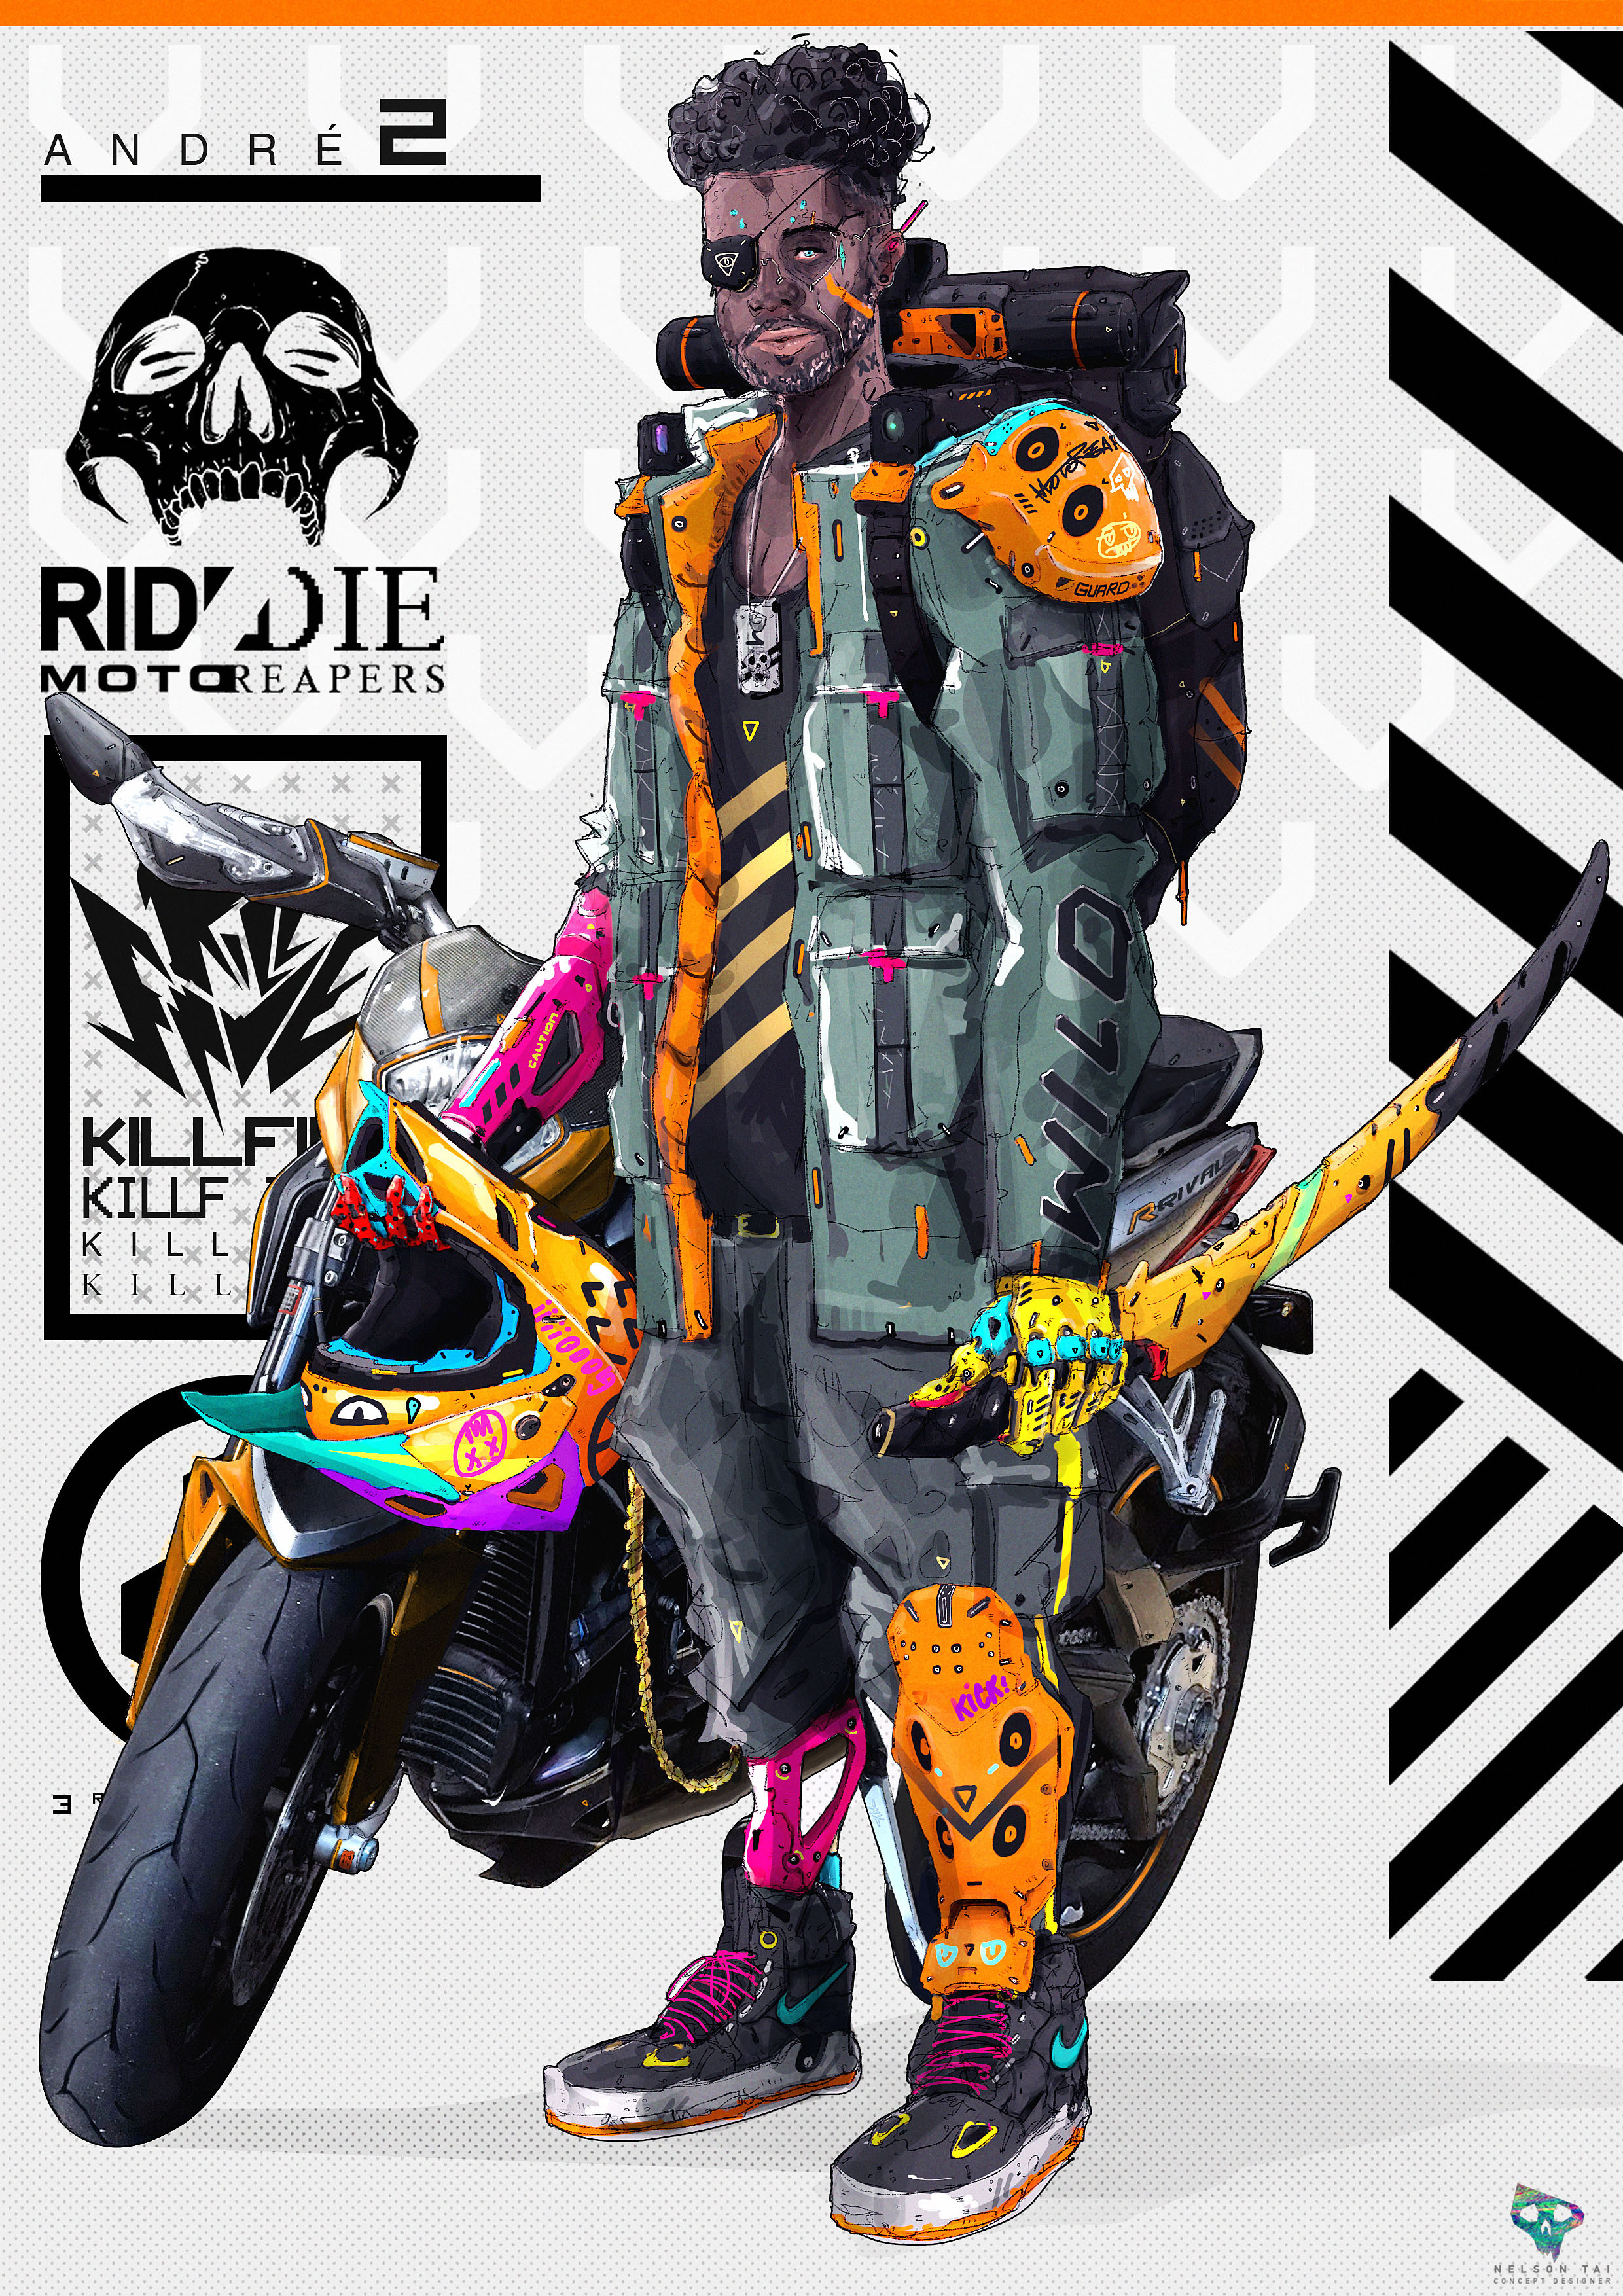 KILLFIVE crew - ANDRE &amp; his Rivale. The quiet and deadly one...